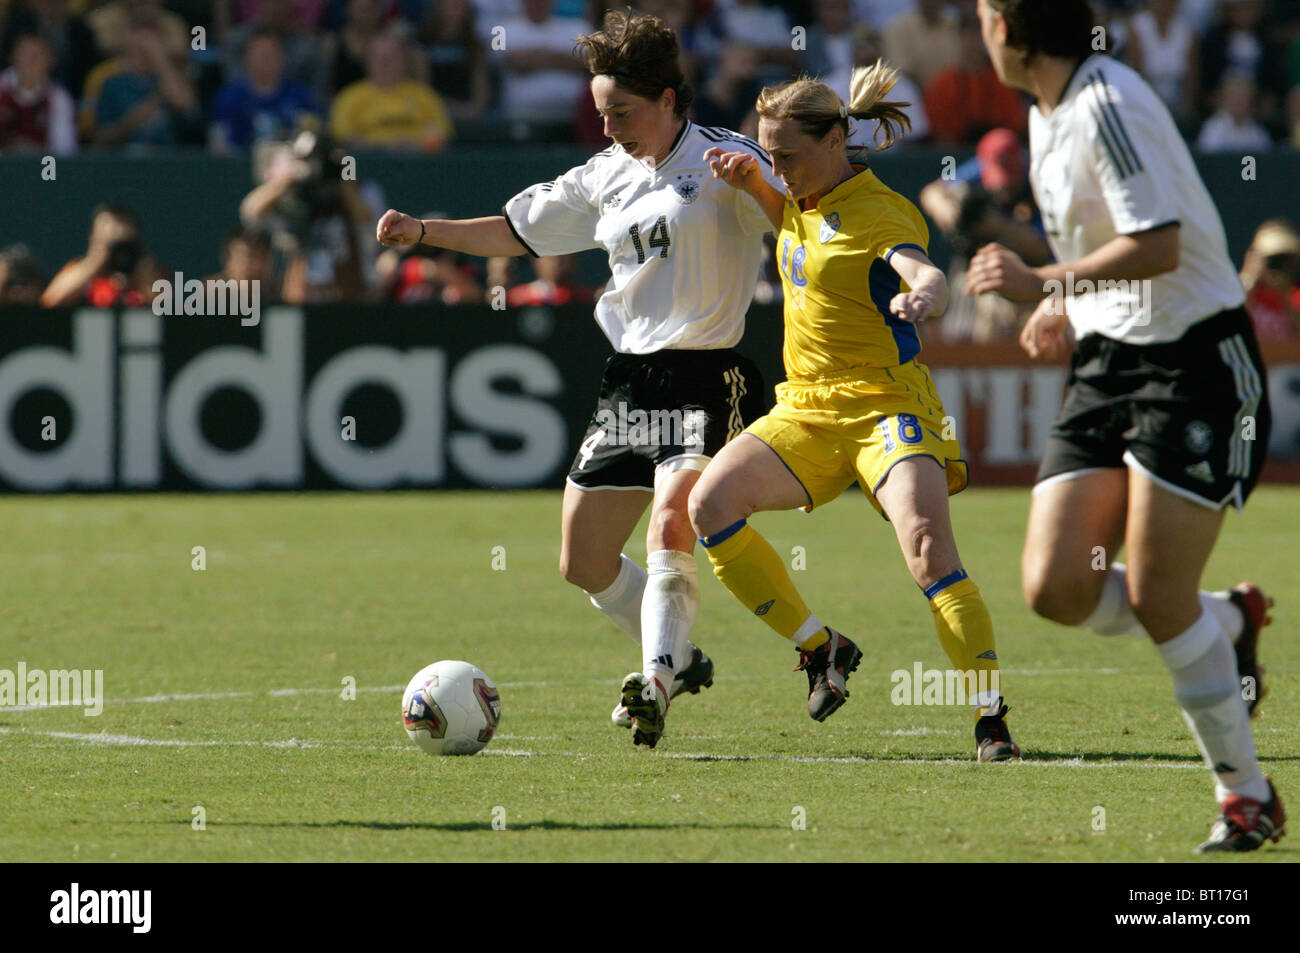 Maren Meinert of Germany (14) and Frida Ostberg of Sweden (18) battle for the ball during the 2003 Women's World Cup final. Stock Photo